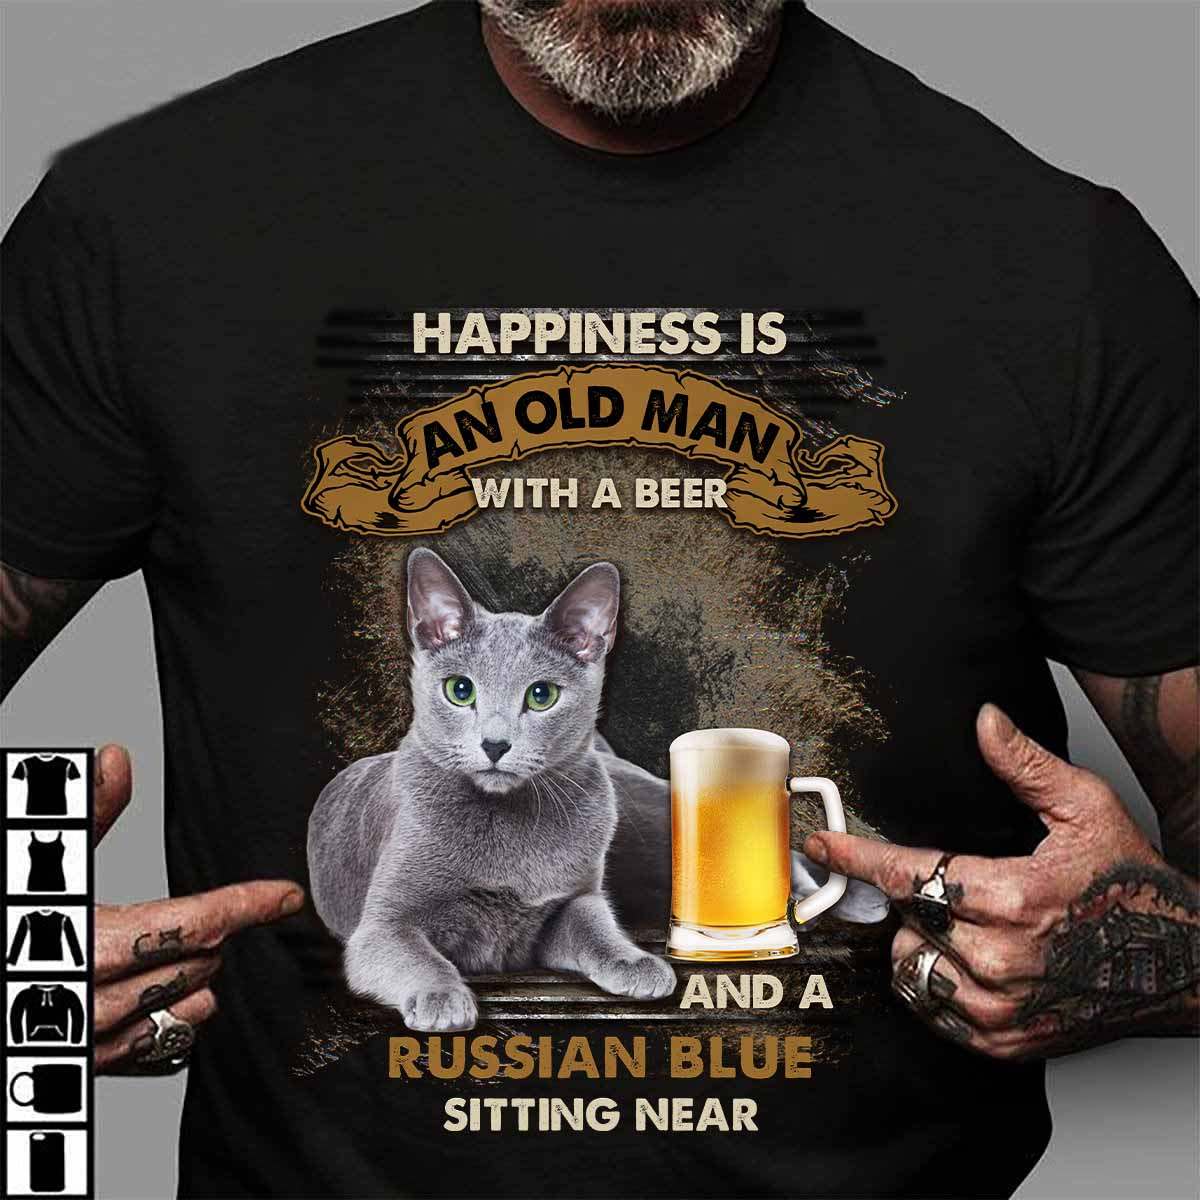 Happiness is an old man with a beer and a Russian blue sitting near - Beer lover